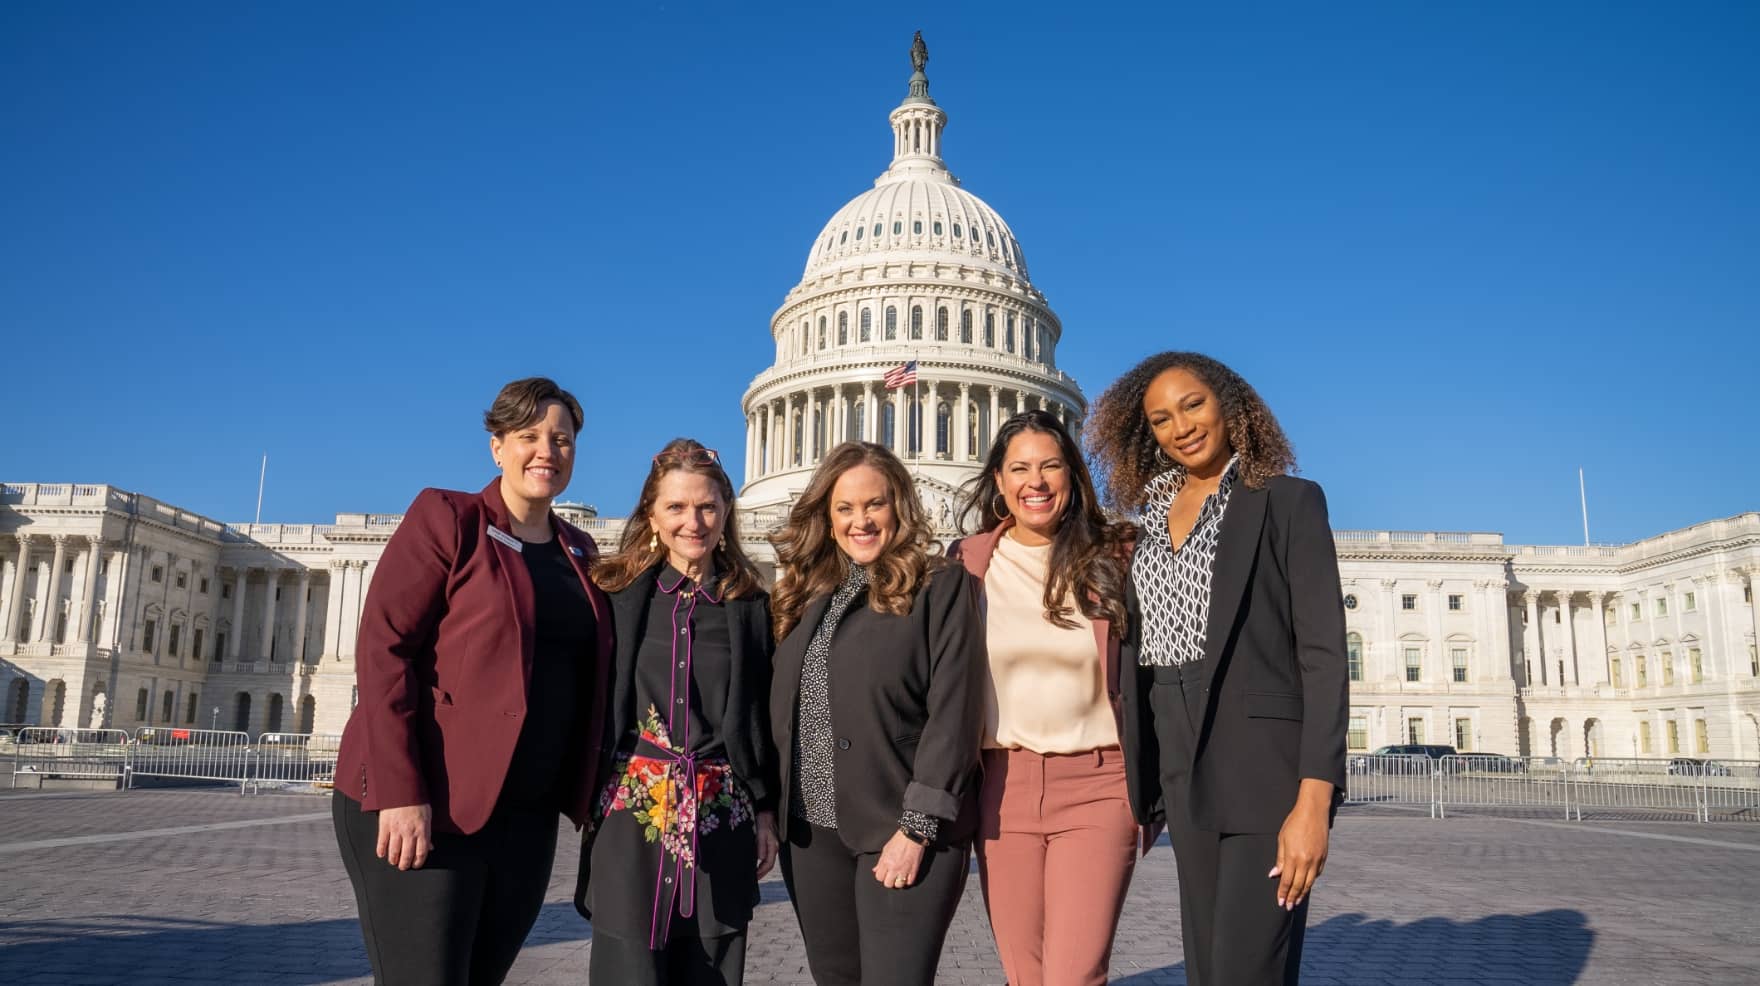 WSF Past President Jessica Mendoza joins the Women’s Sports Foundation to honor National Girls & Women in Sports Day in Washington, D.C. on February 7, 2024. [L-R: WSF VP Advocacy, Sarah Axelson, WSF Trustee Emeritae Jayma Meyer, WSF CEO Danette Leighton, Jessica Mendoza, WSF Trustee Ari Chambers] (Photo by Adam Reist/Dare to Be Films for WSF)